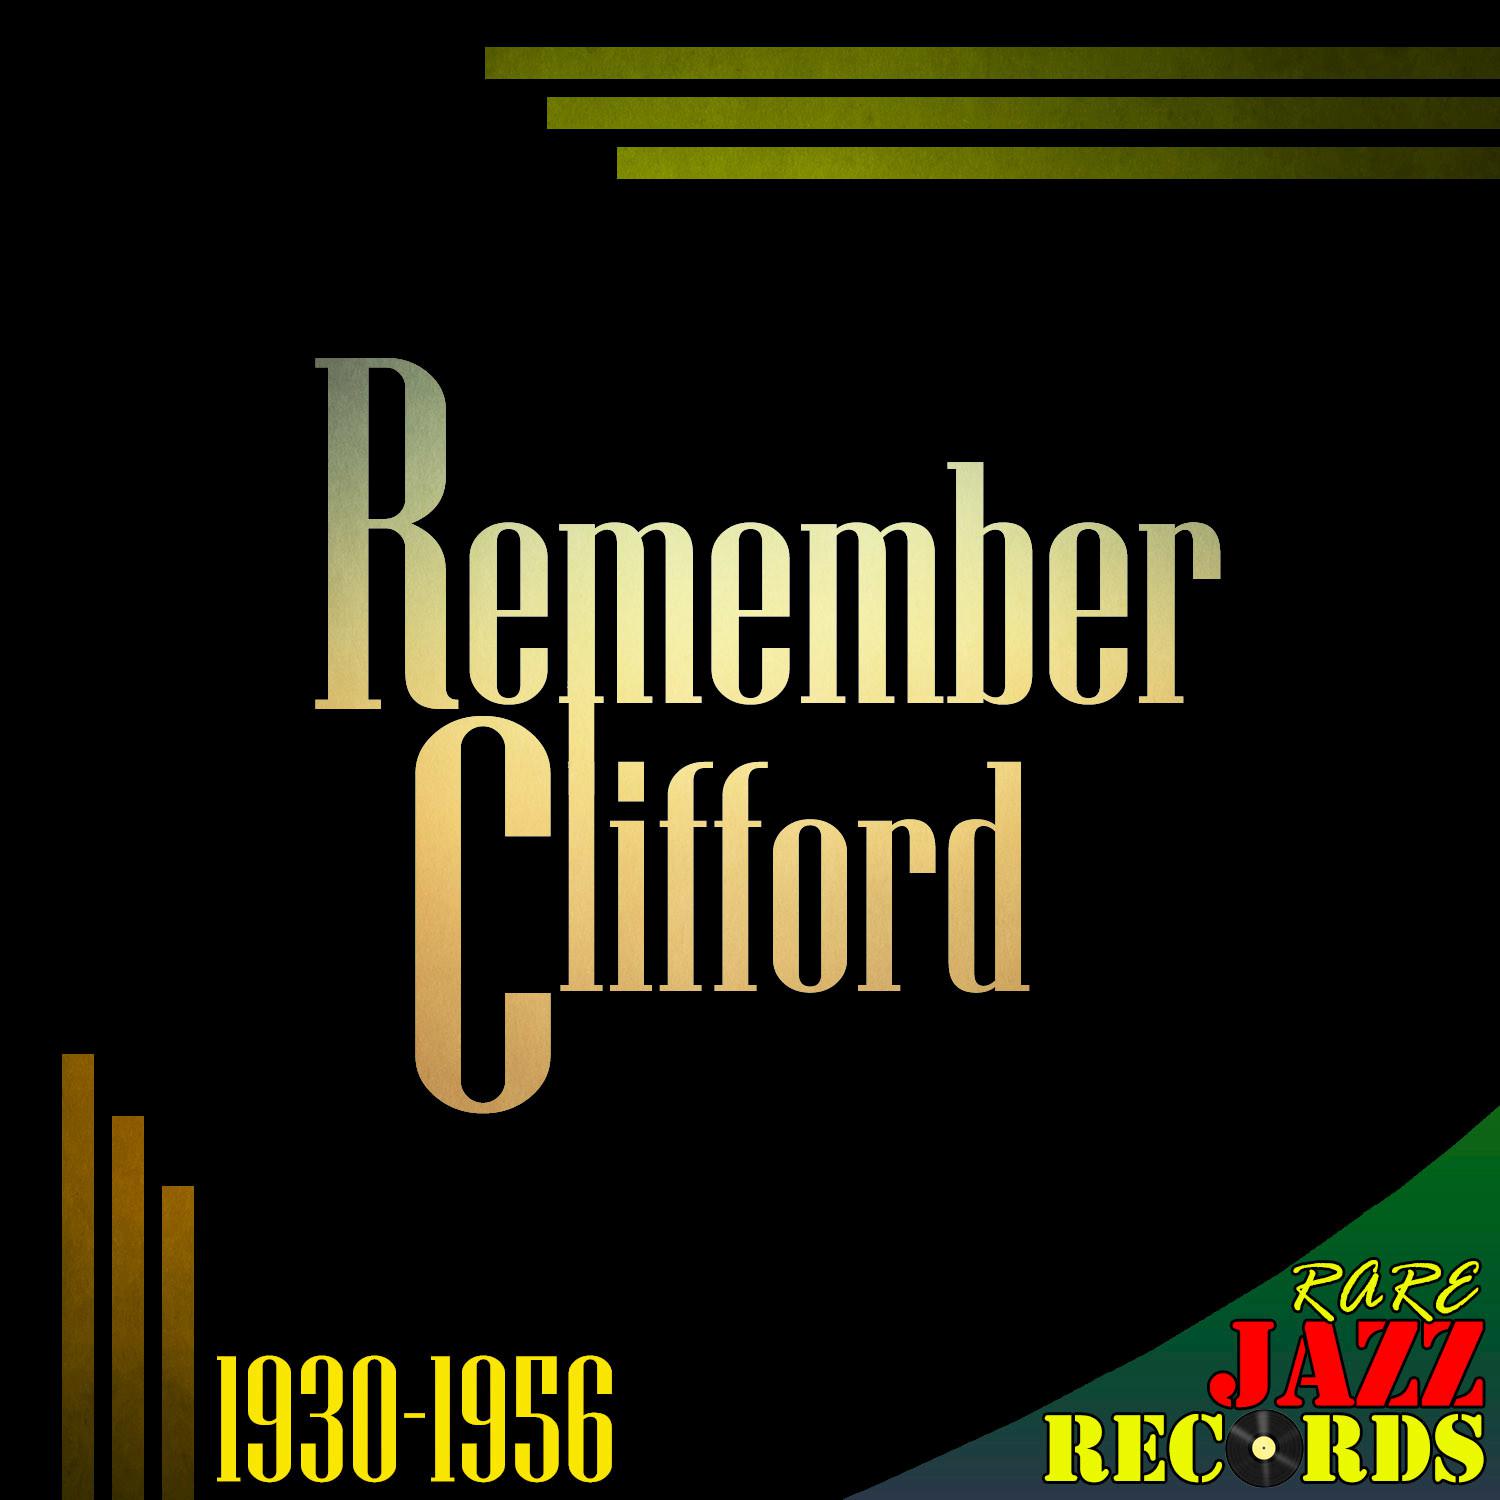 Rare Jazz Records - Remember Clifford (1930-1956)